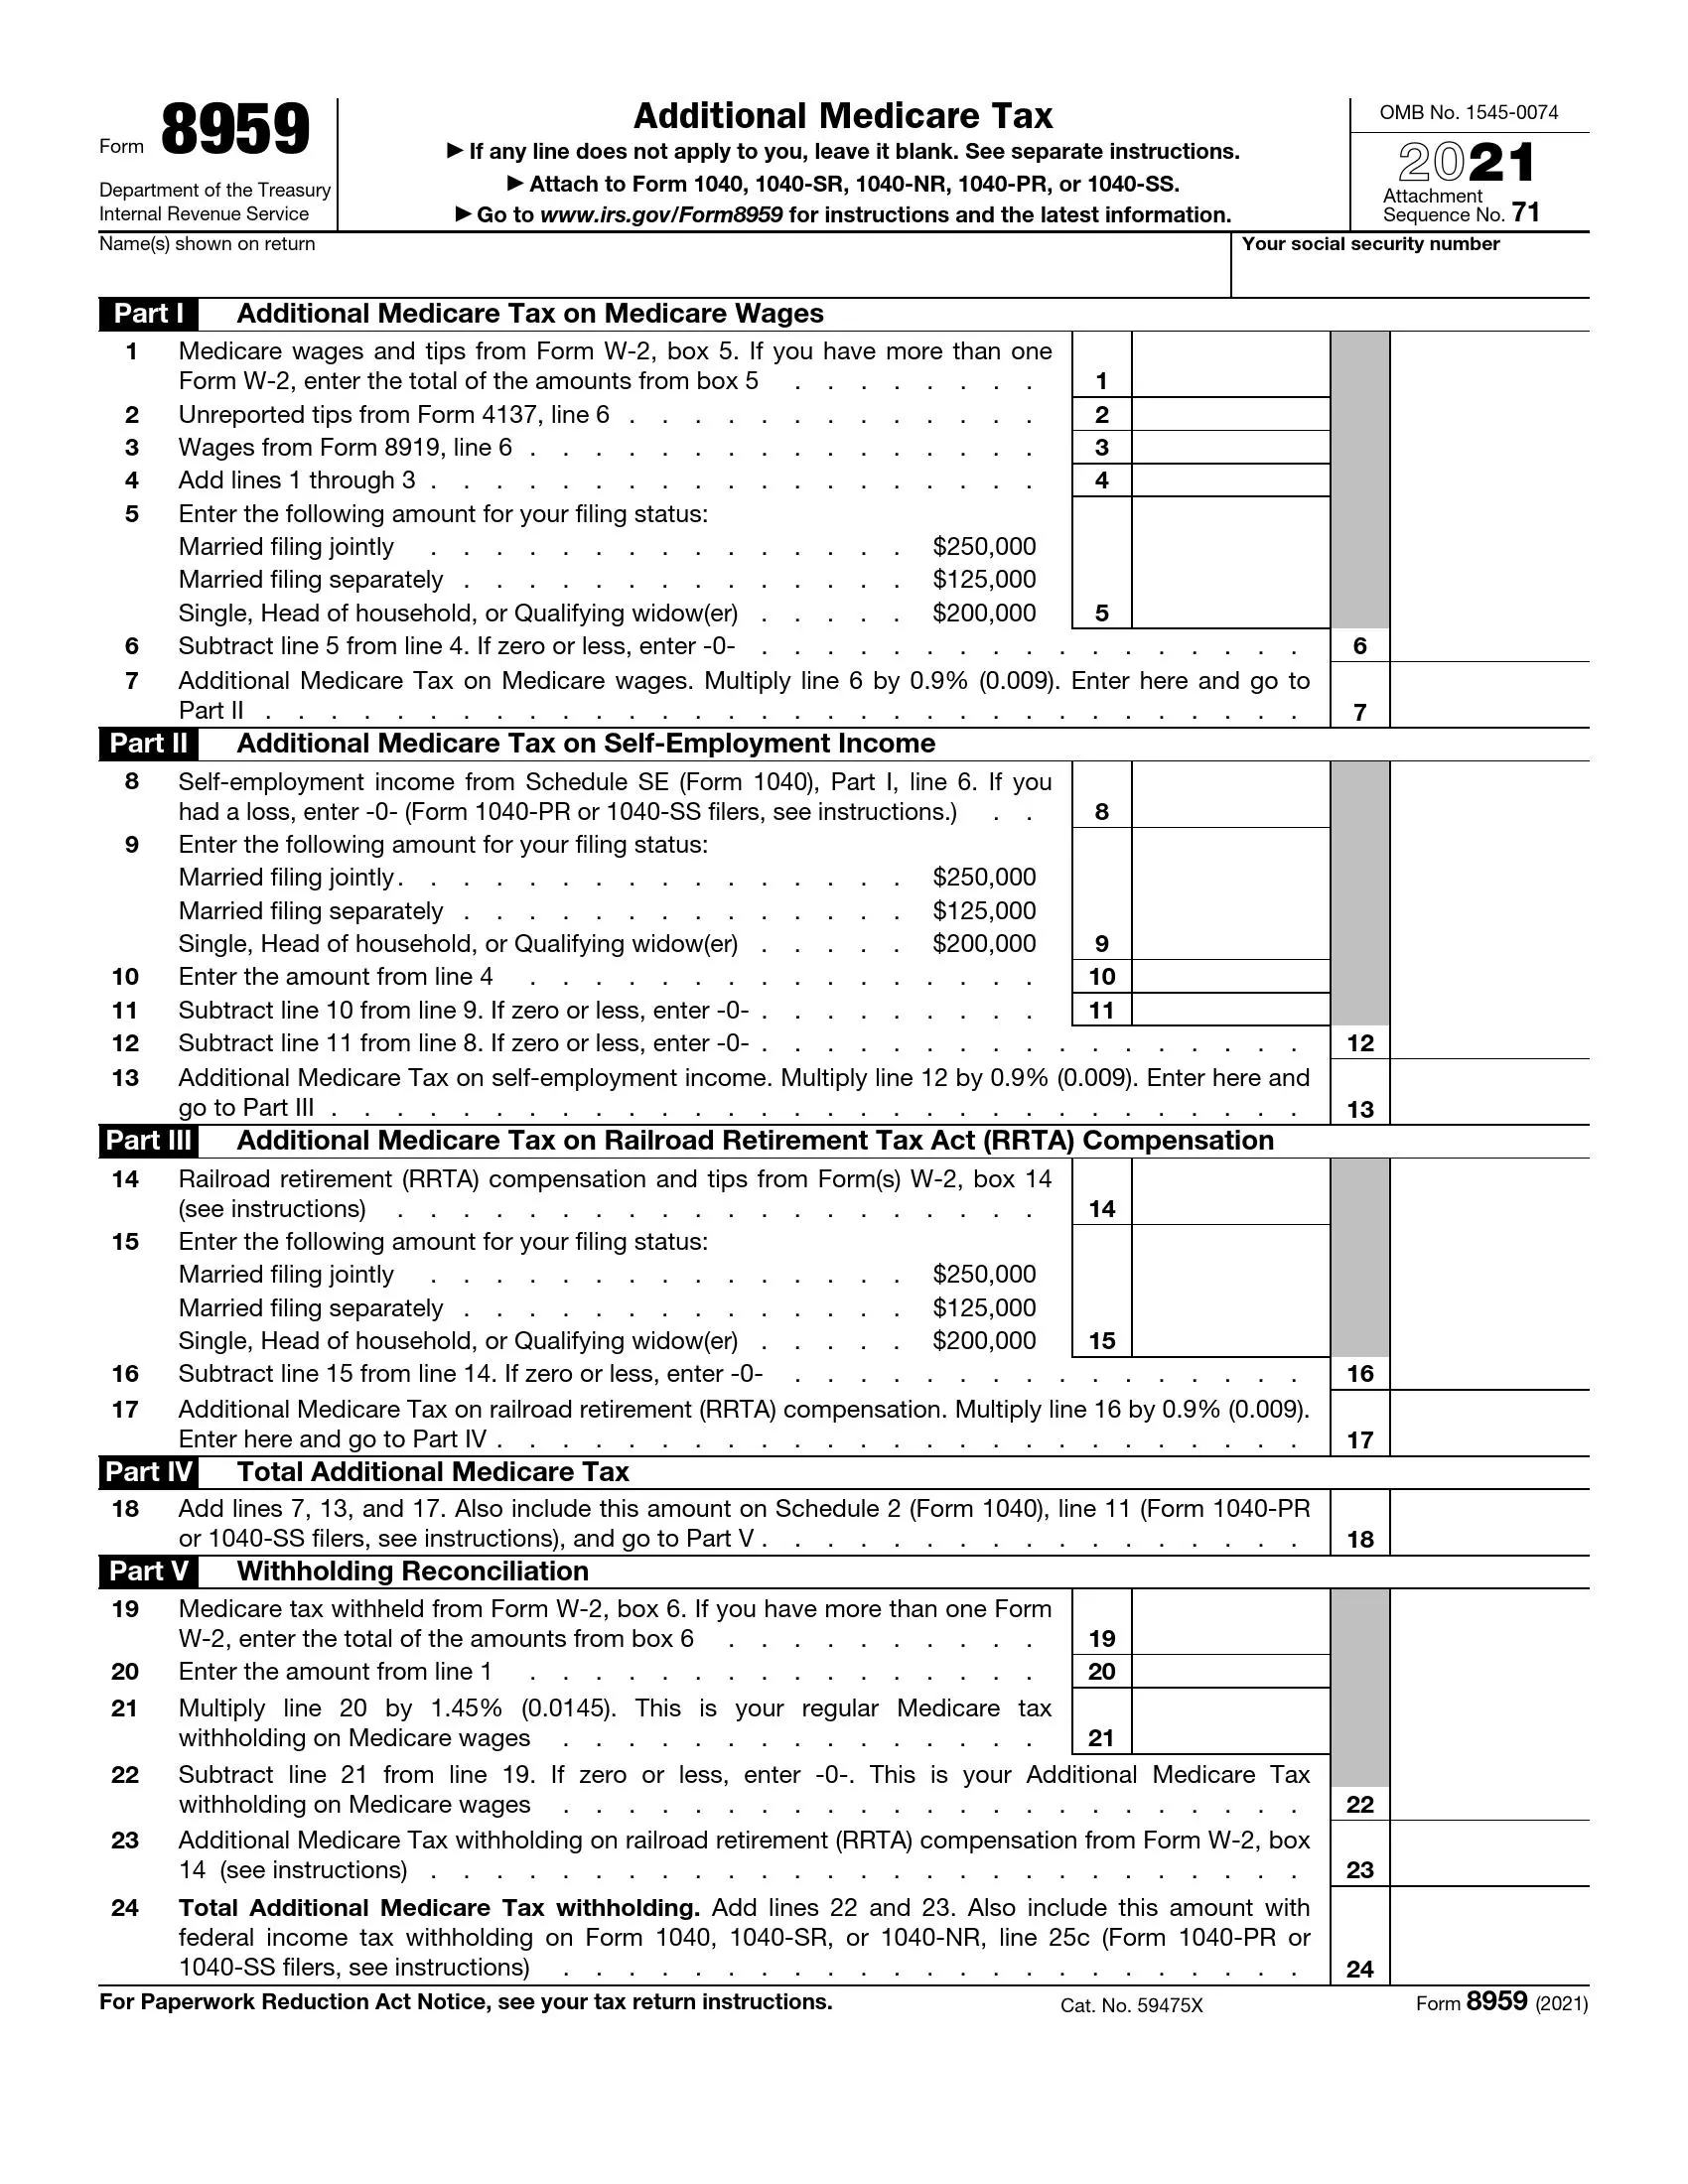 irs form 8959 2021 preview